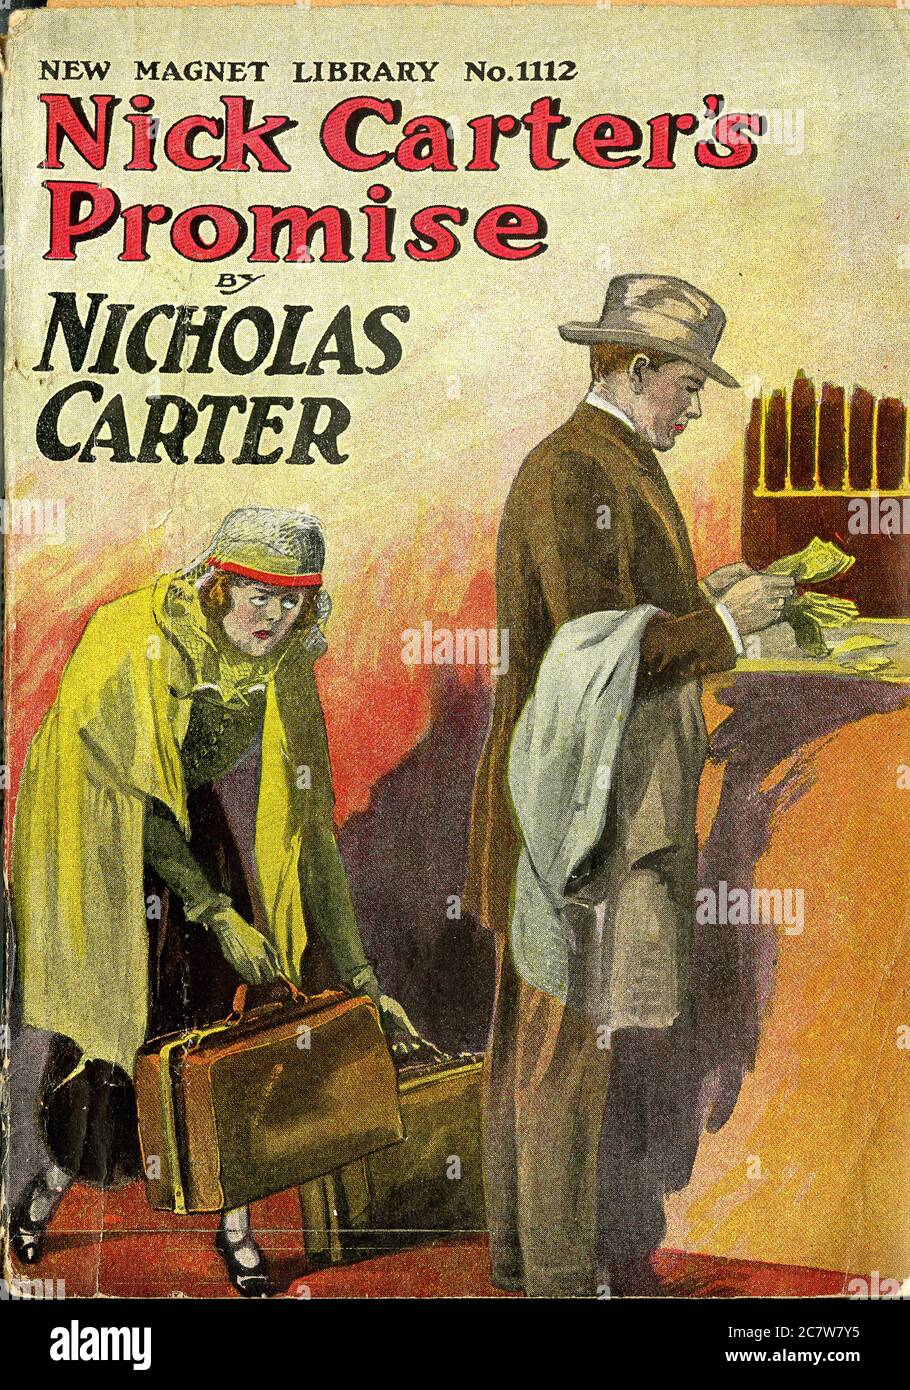 Nicholas Carter - Nick Carter's Promise - New Magnet Library - Vintage Pulp Literary Stock Photo